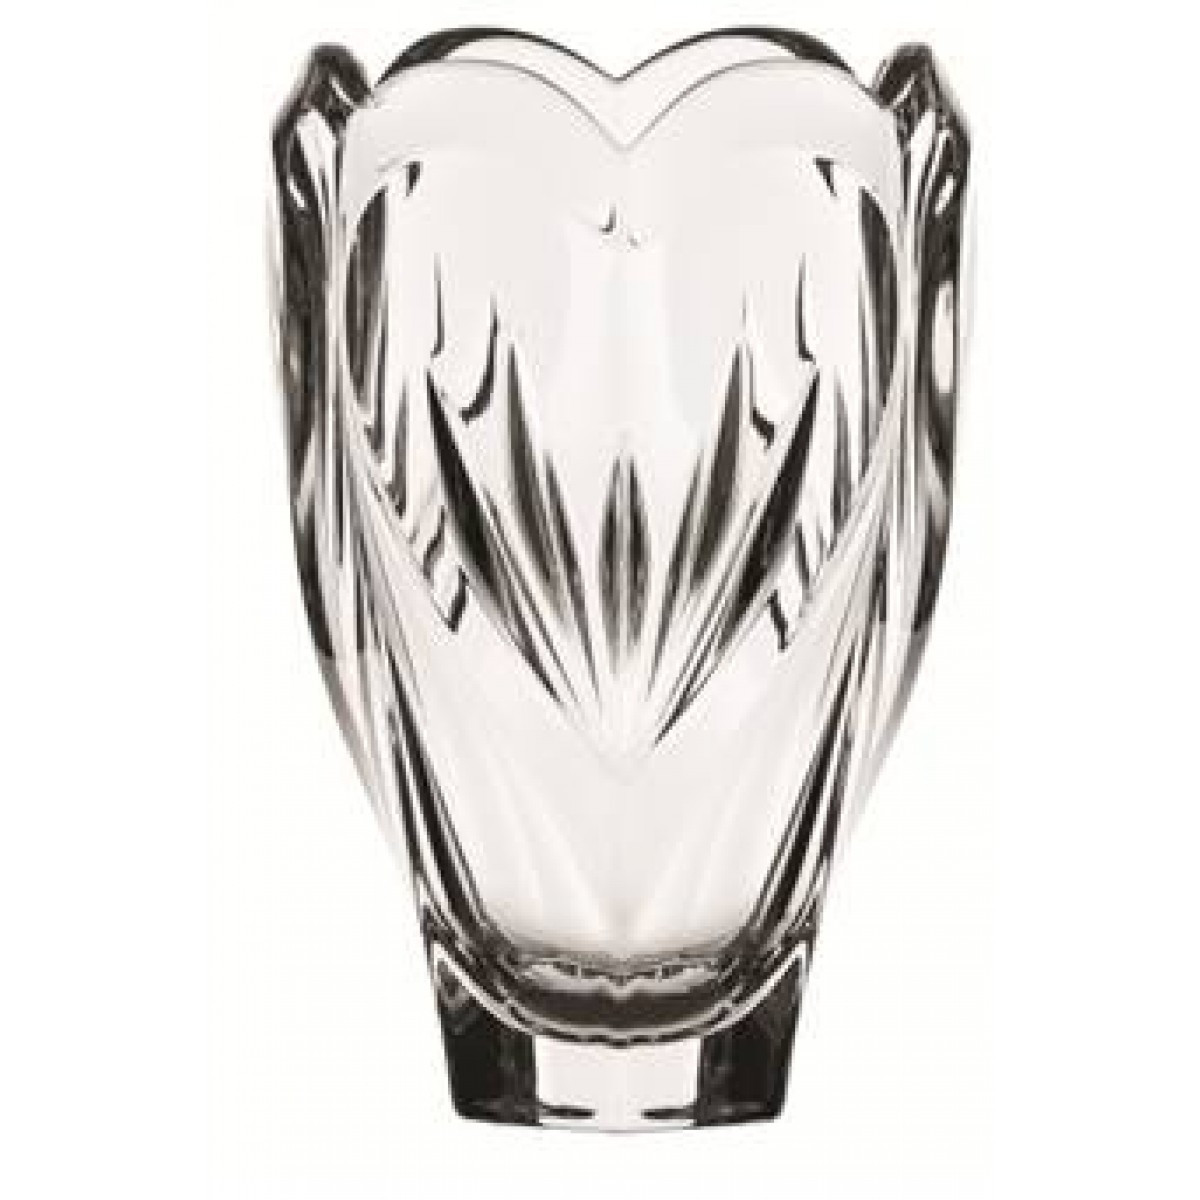 14 attractive Waterford Markham Vase 2024 free download waterford markham vase of heritage sweet memories clear 6 5in vase marquis by waterford us throughout heritage sweet memories clear 6 5in vase